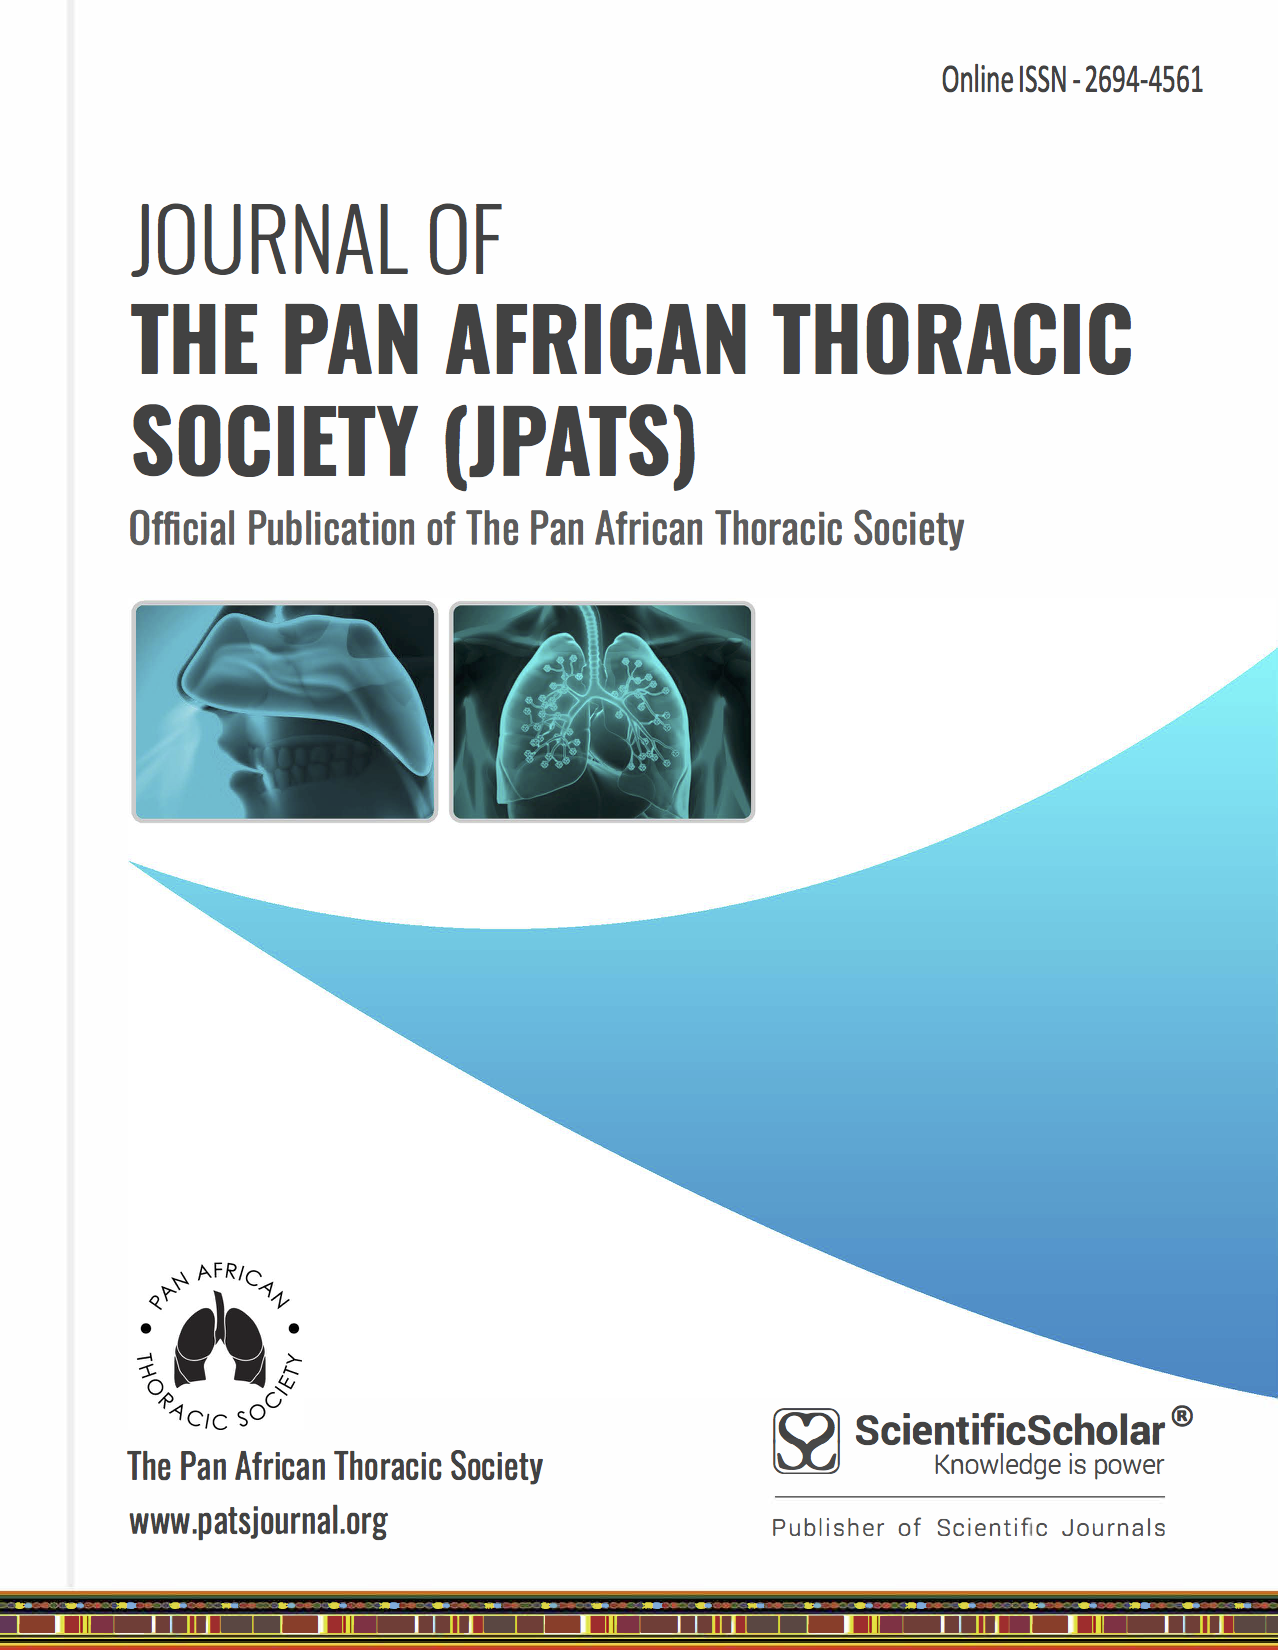 Journal of the Pan African Thoracic Society